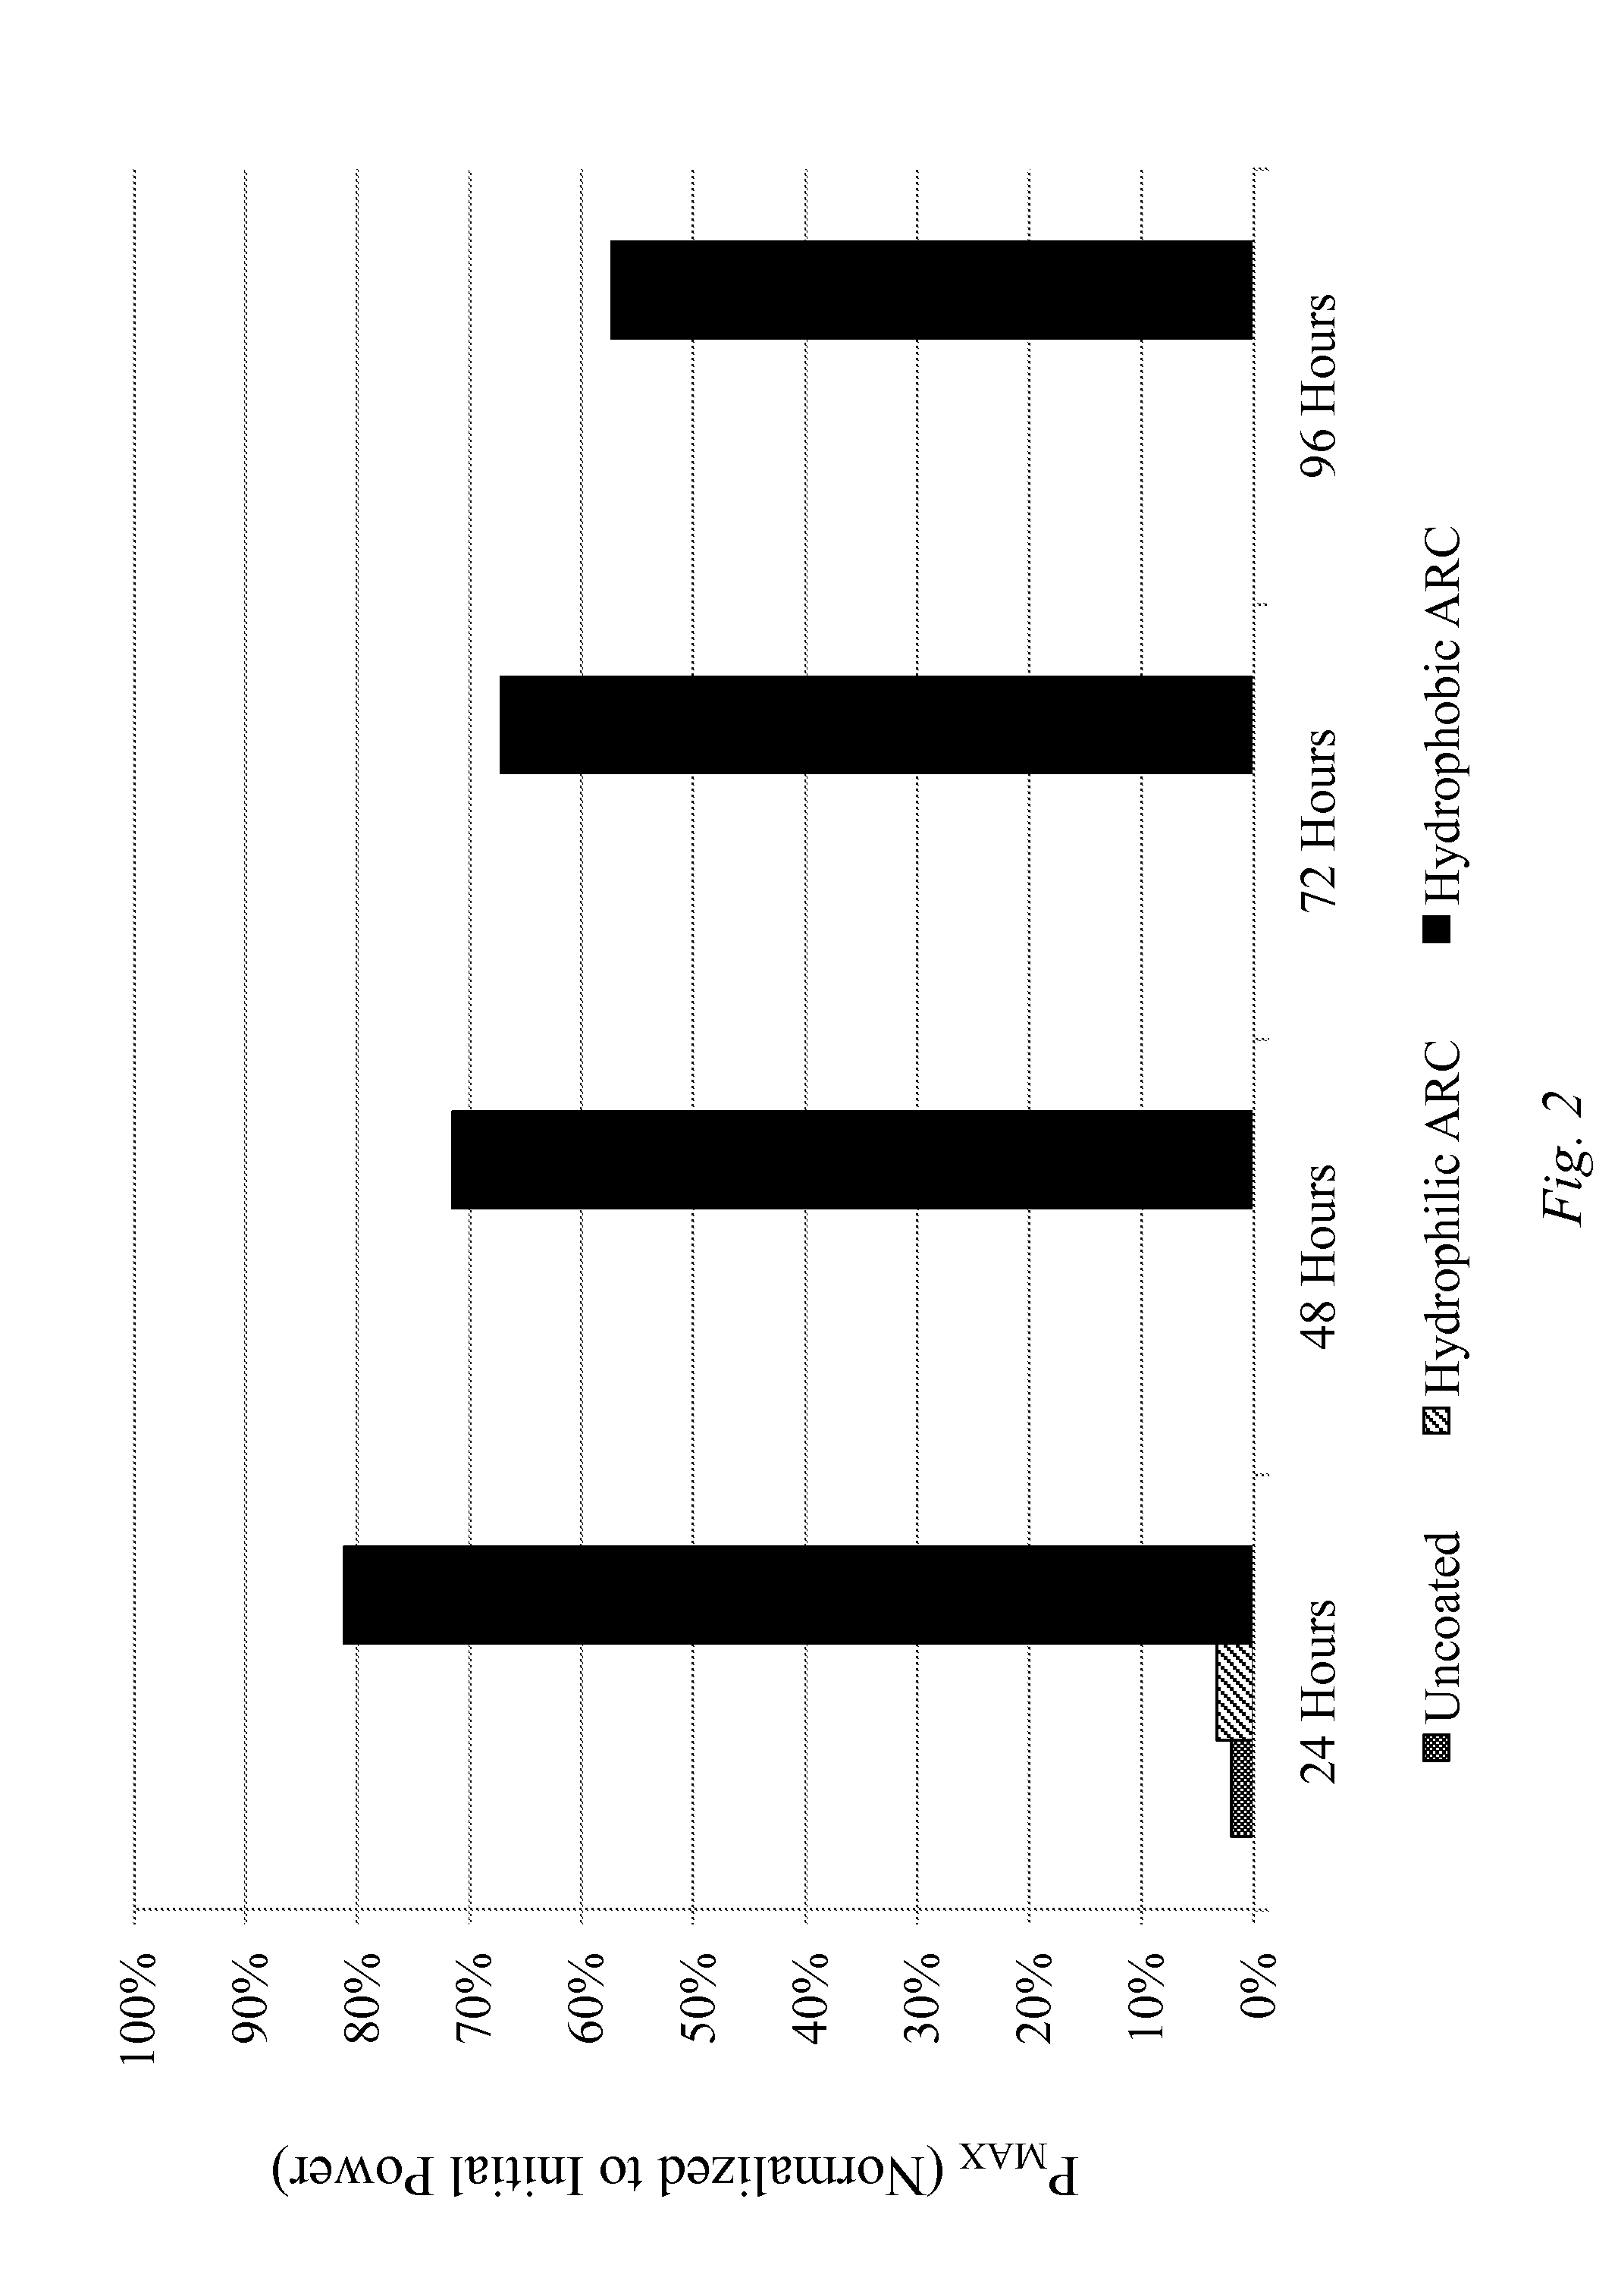 Coating materials and methods for enhanced reliability